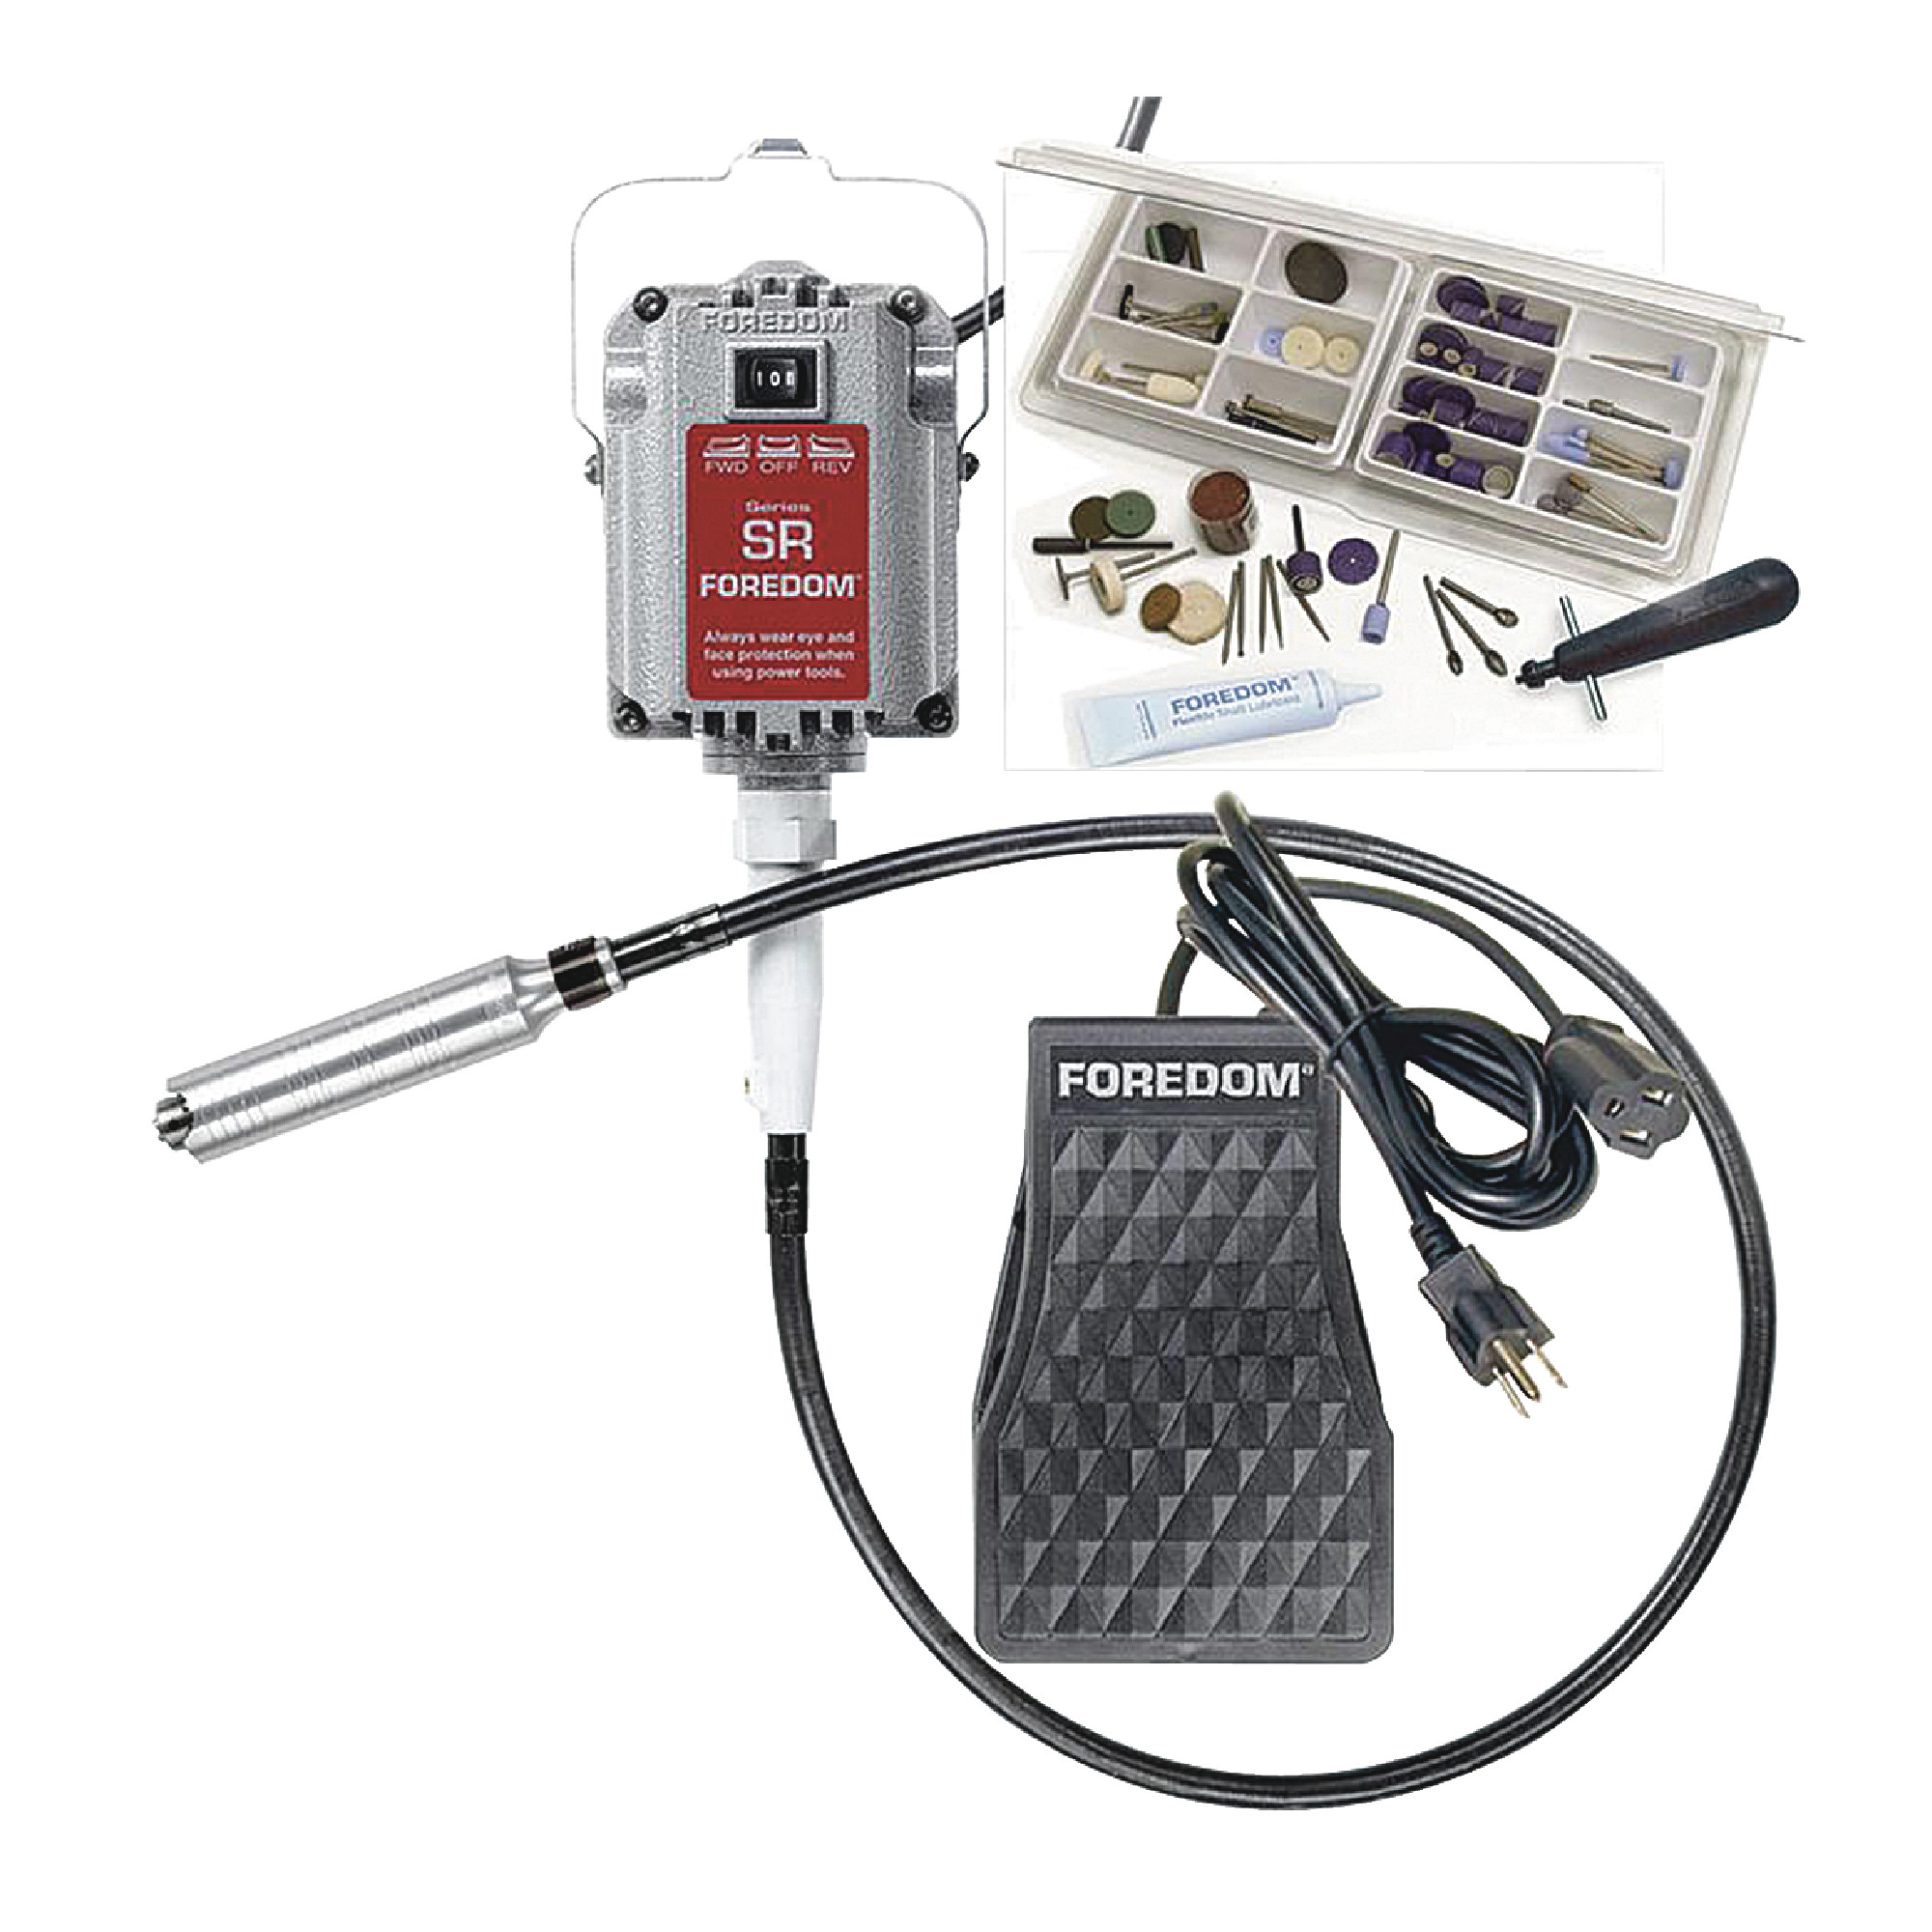 Flexible Shaft & Motor Kit with Accessories